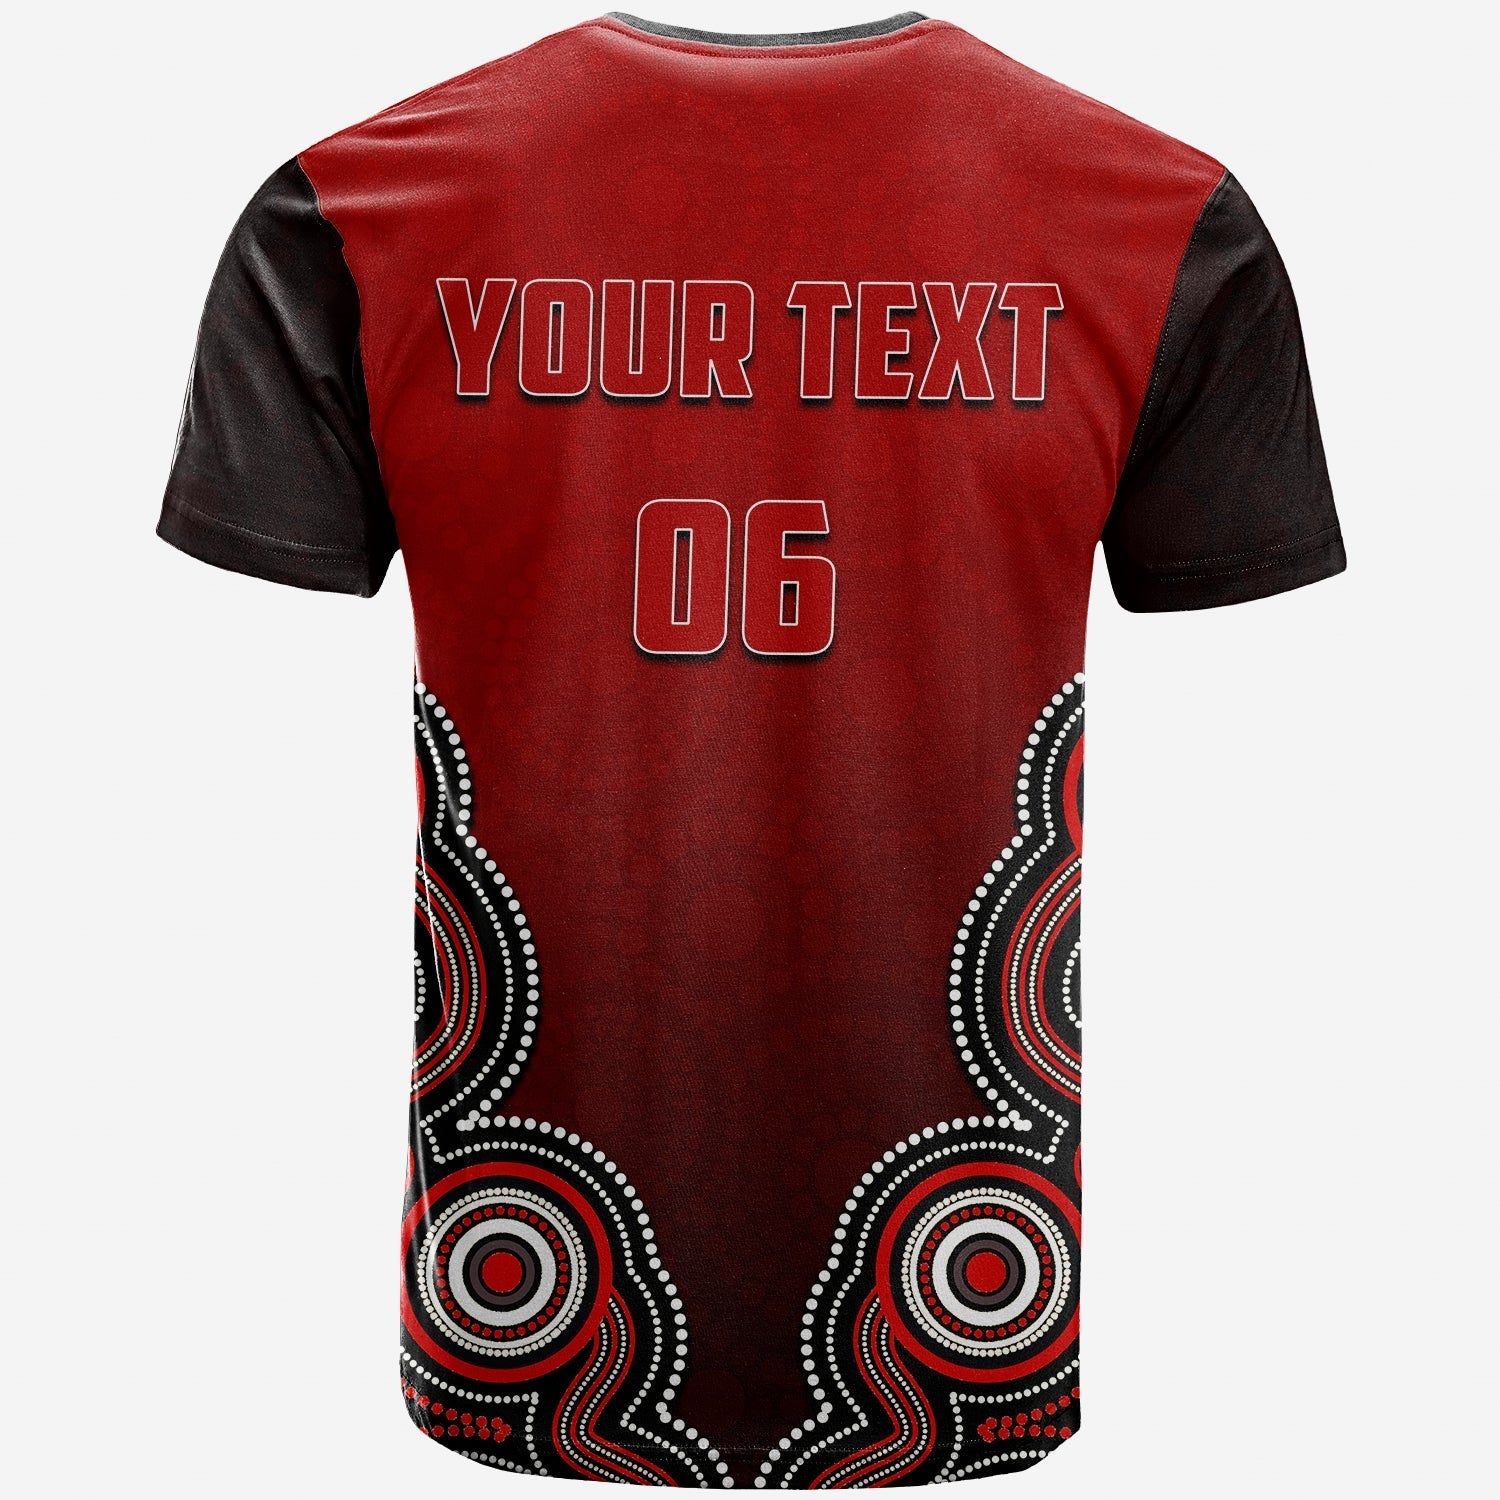 custom-personalised-and-number-melbourne-renegades-t-shirt-cricket-aboriginal-style-lt6